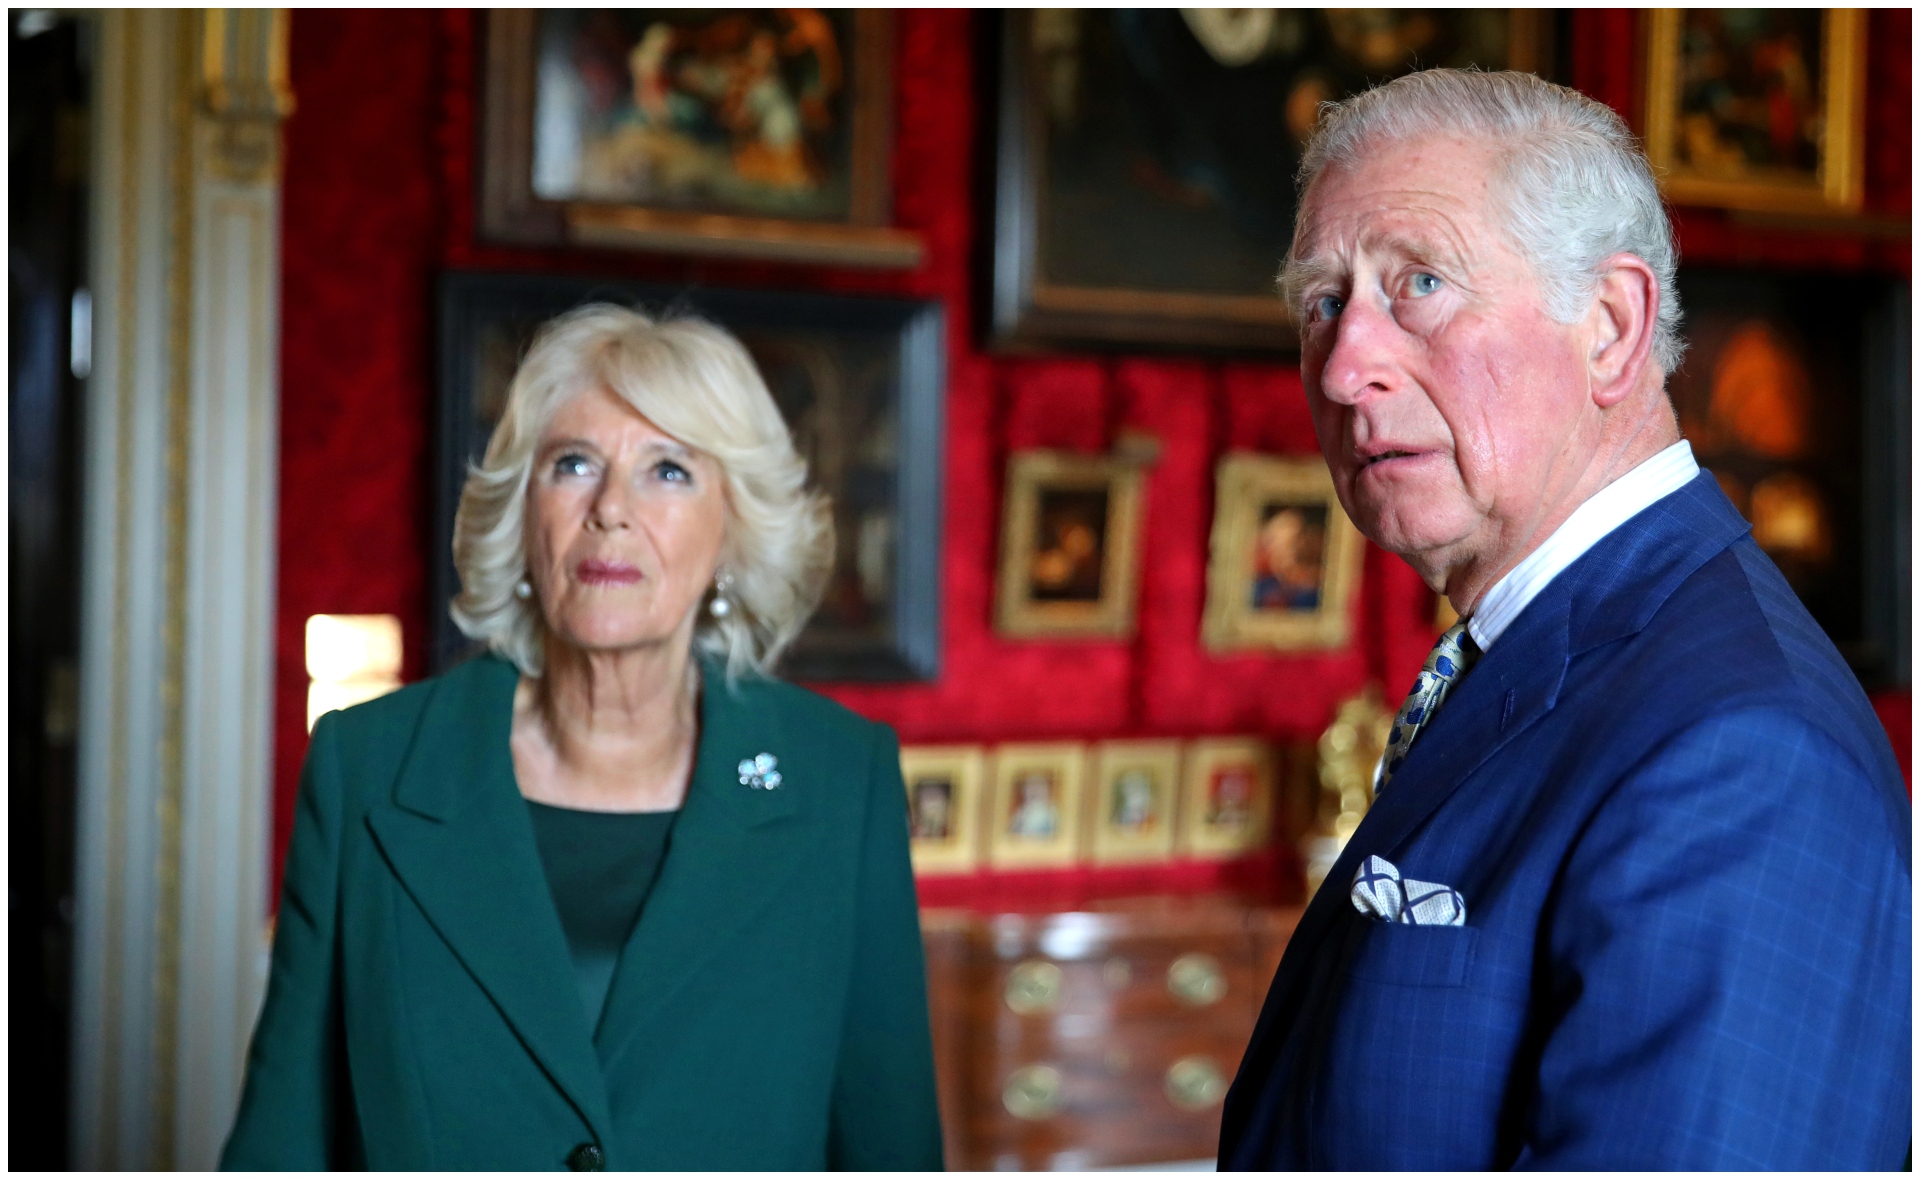 Prince Charles and Duchess Camilla have followed in the Queen’s footsteps by receiving their first COVID-19 vaccination